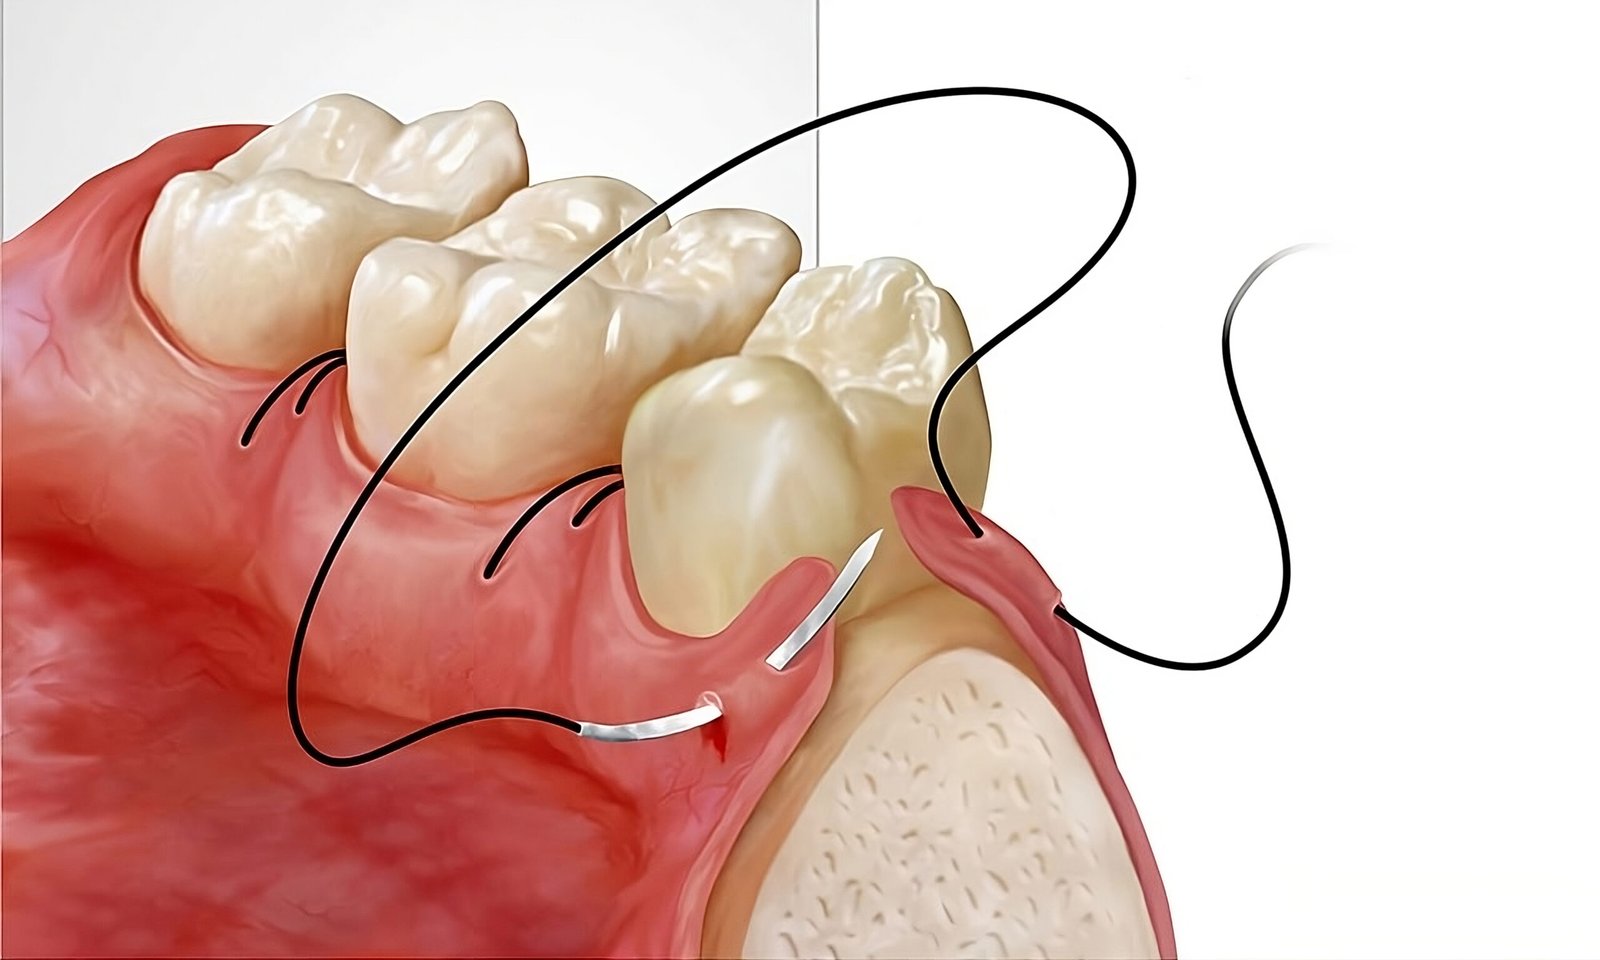 Tooth removal dental surgery in Scarborough